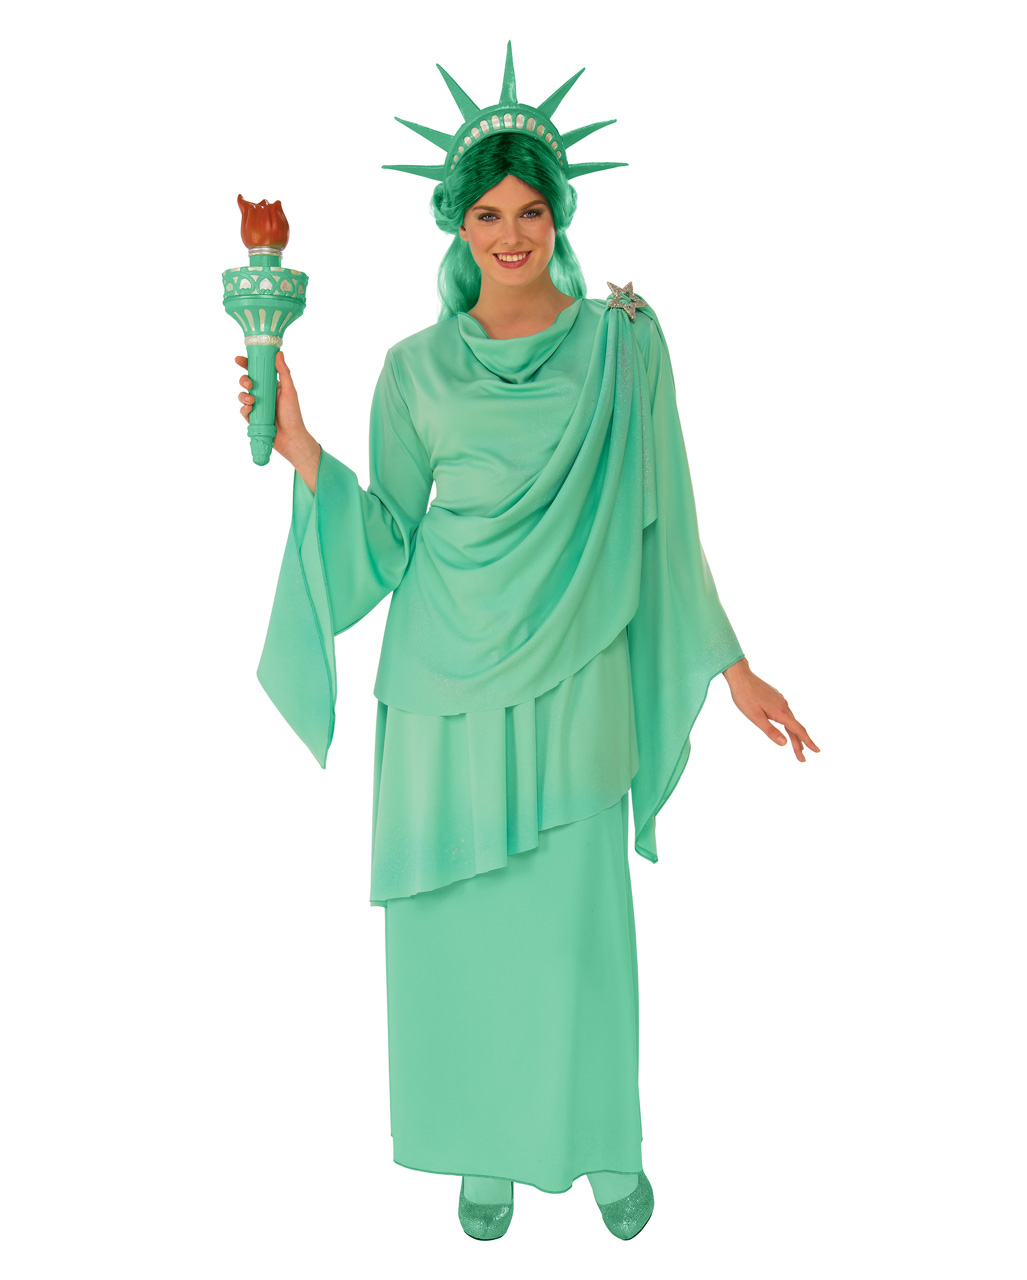 Statue of Liberty Ladies Fancy Dress American NY Novelty Adults Costume Outfit 